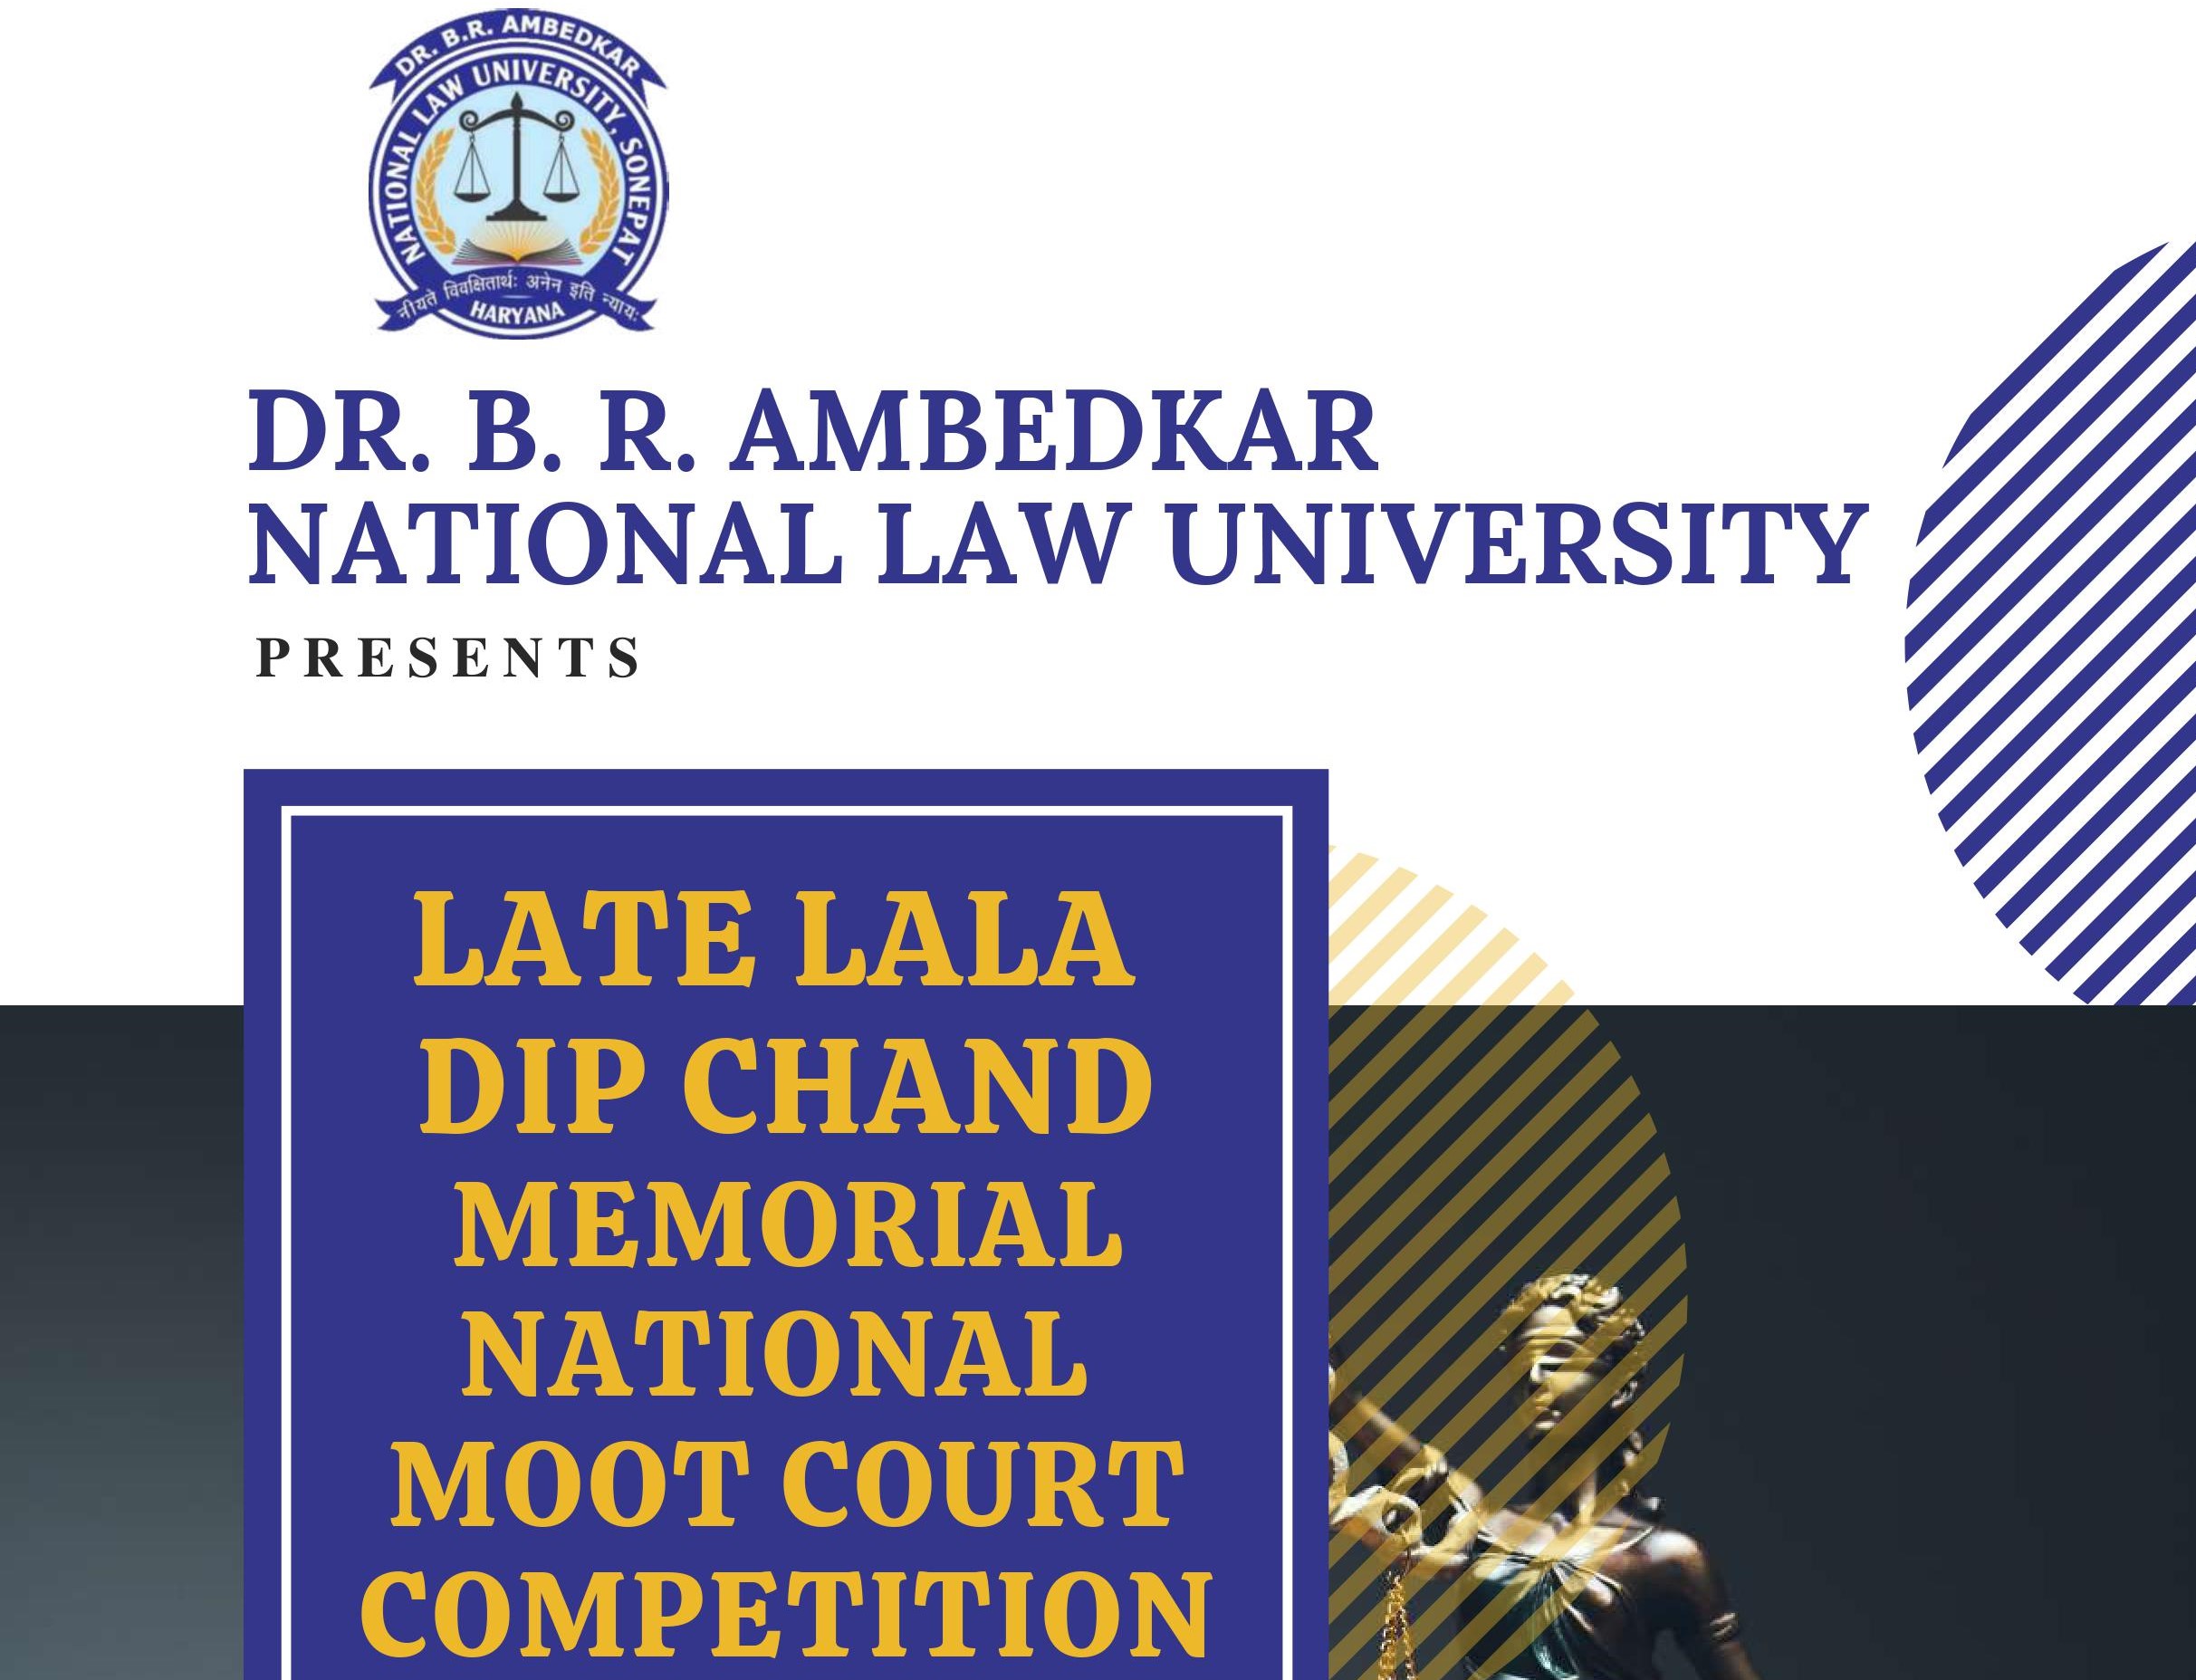 DBRANLU Late Lala Dip Chand Memorial National Moot Court Competition 2021